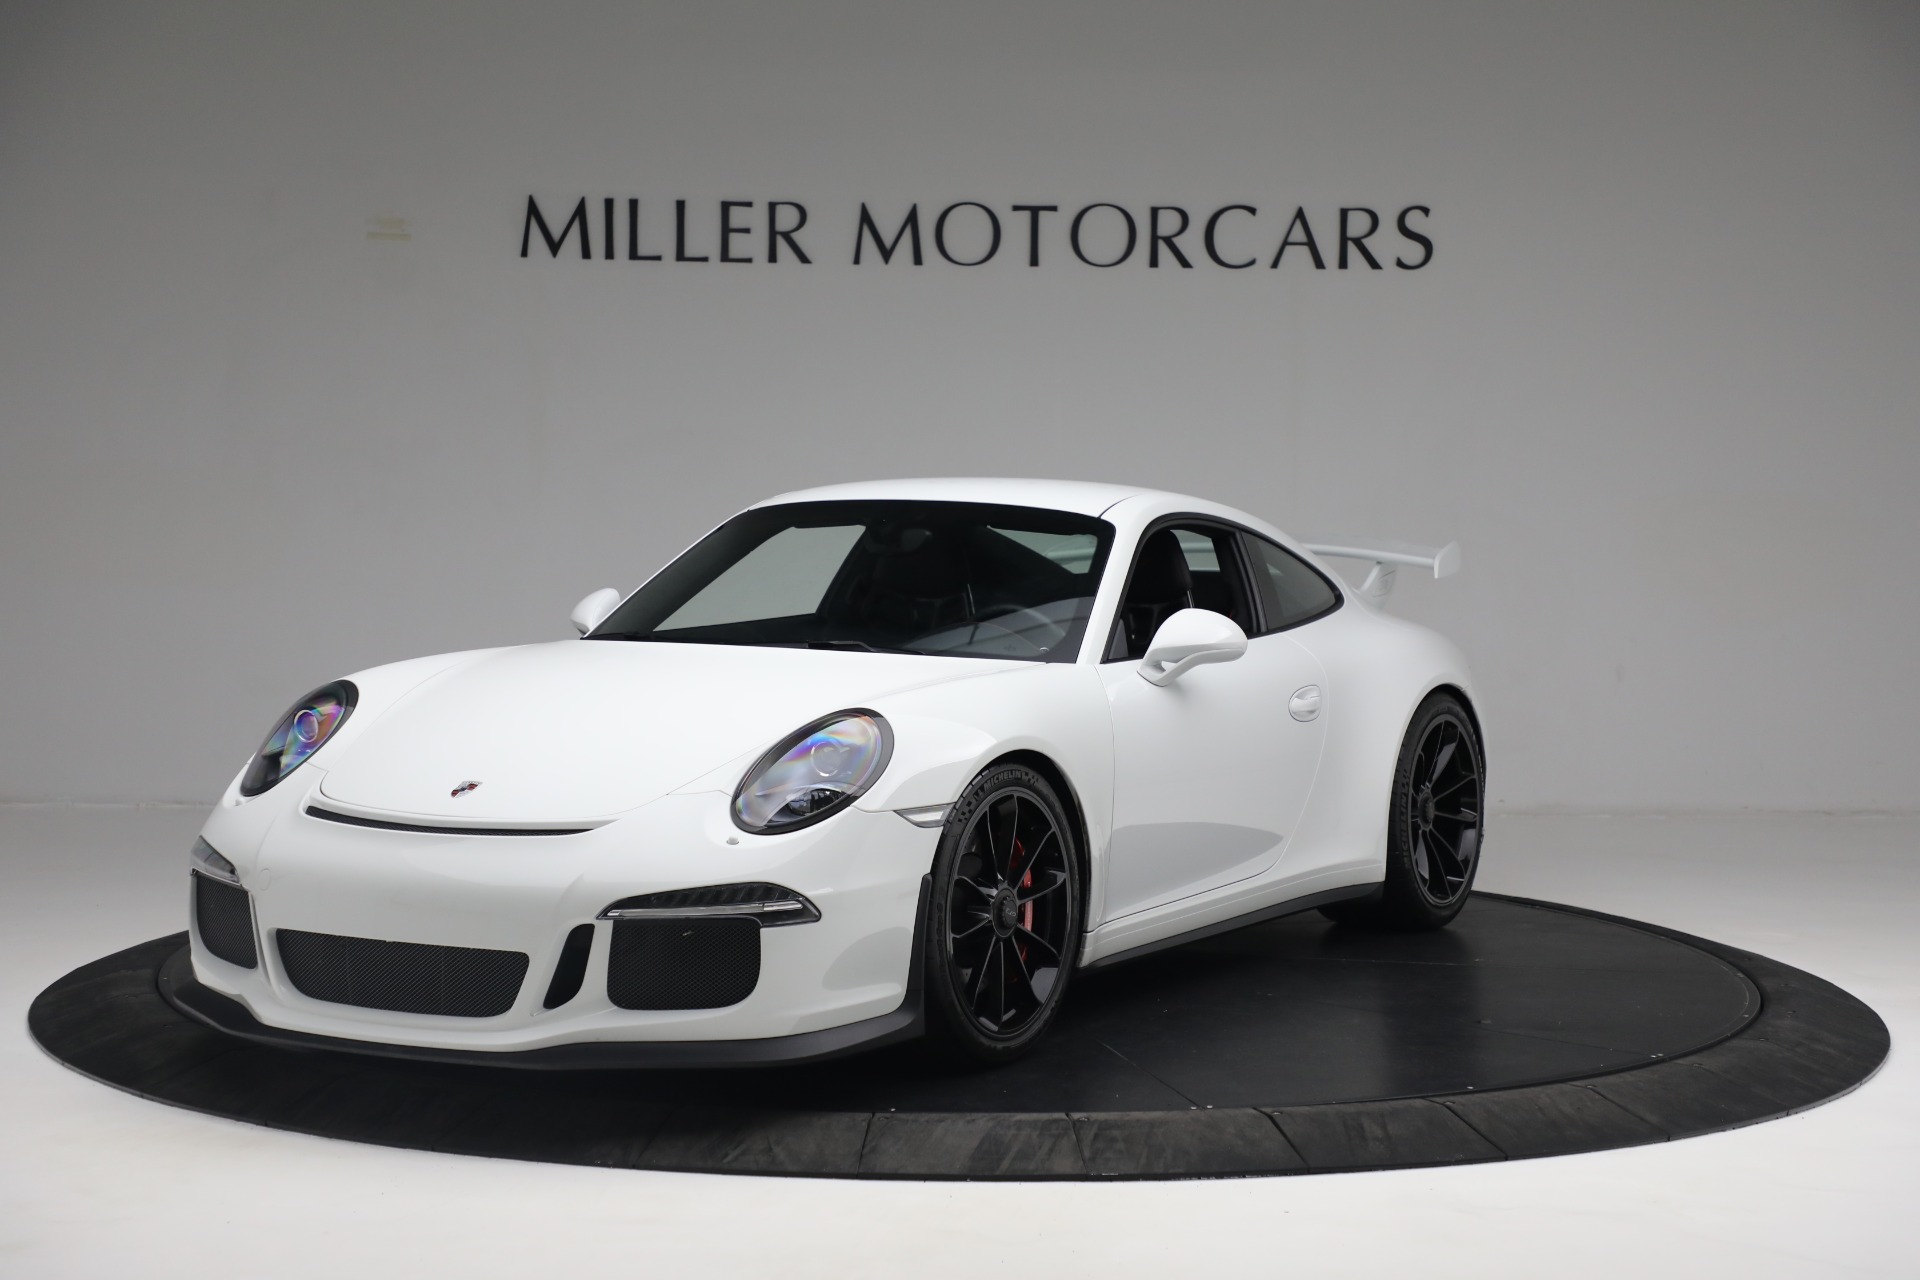 Used 2015 Porsche 911 GT3 for sale Sold at Rolls-Royce Motor Cars Greenwich in Greenwich CT 06830 1